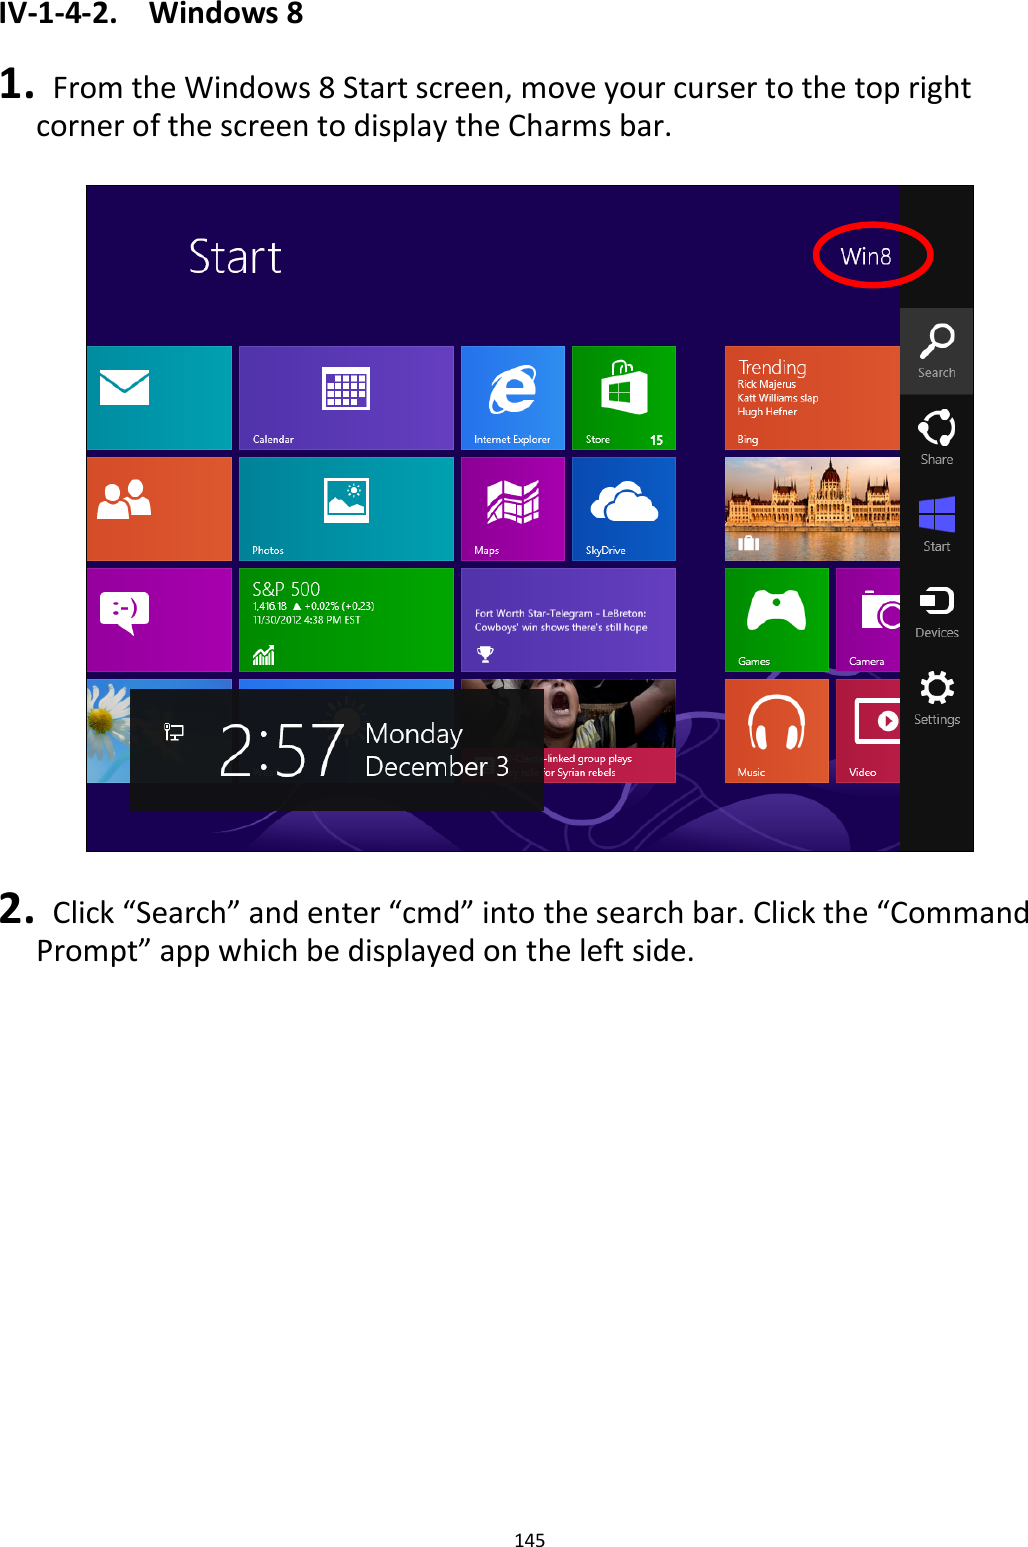 145  IV-1-4-2.  Windows 8  1.   From the Windows 8 Start screen, move your curser to the top right corner of the screen to display the Charms bar.    2.   Click “Search” and enter “cmd” into the search bar. Click the “Command Prompt” app which be displayed on the left side.  